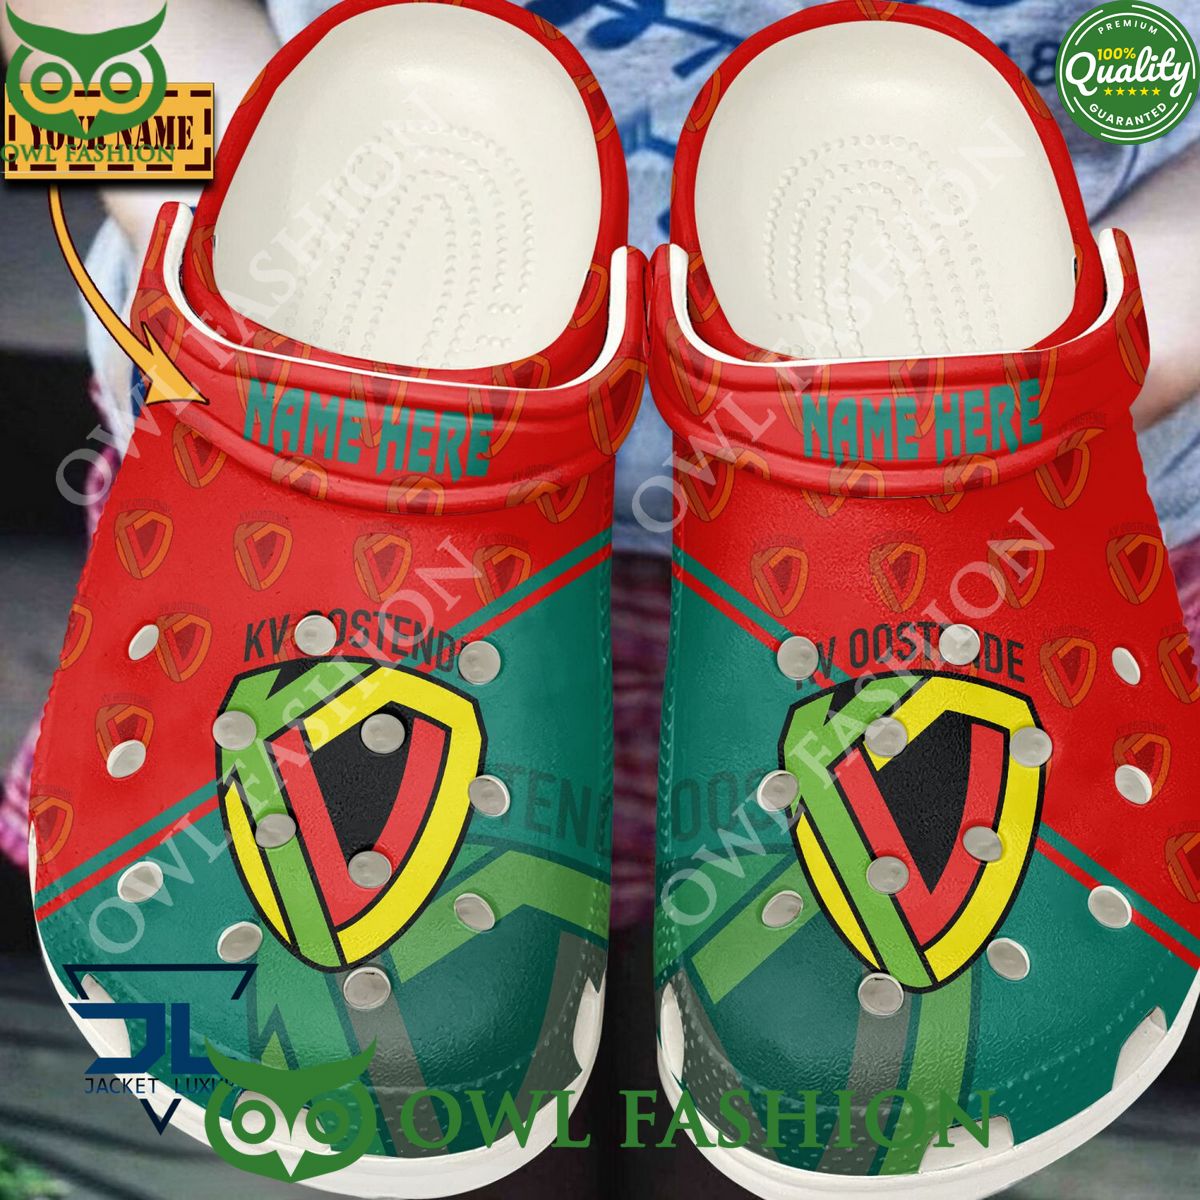 pro league kv oostende football team personalized crocs 1 a1S1I.jpg